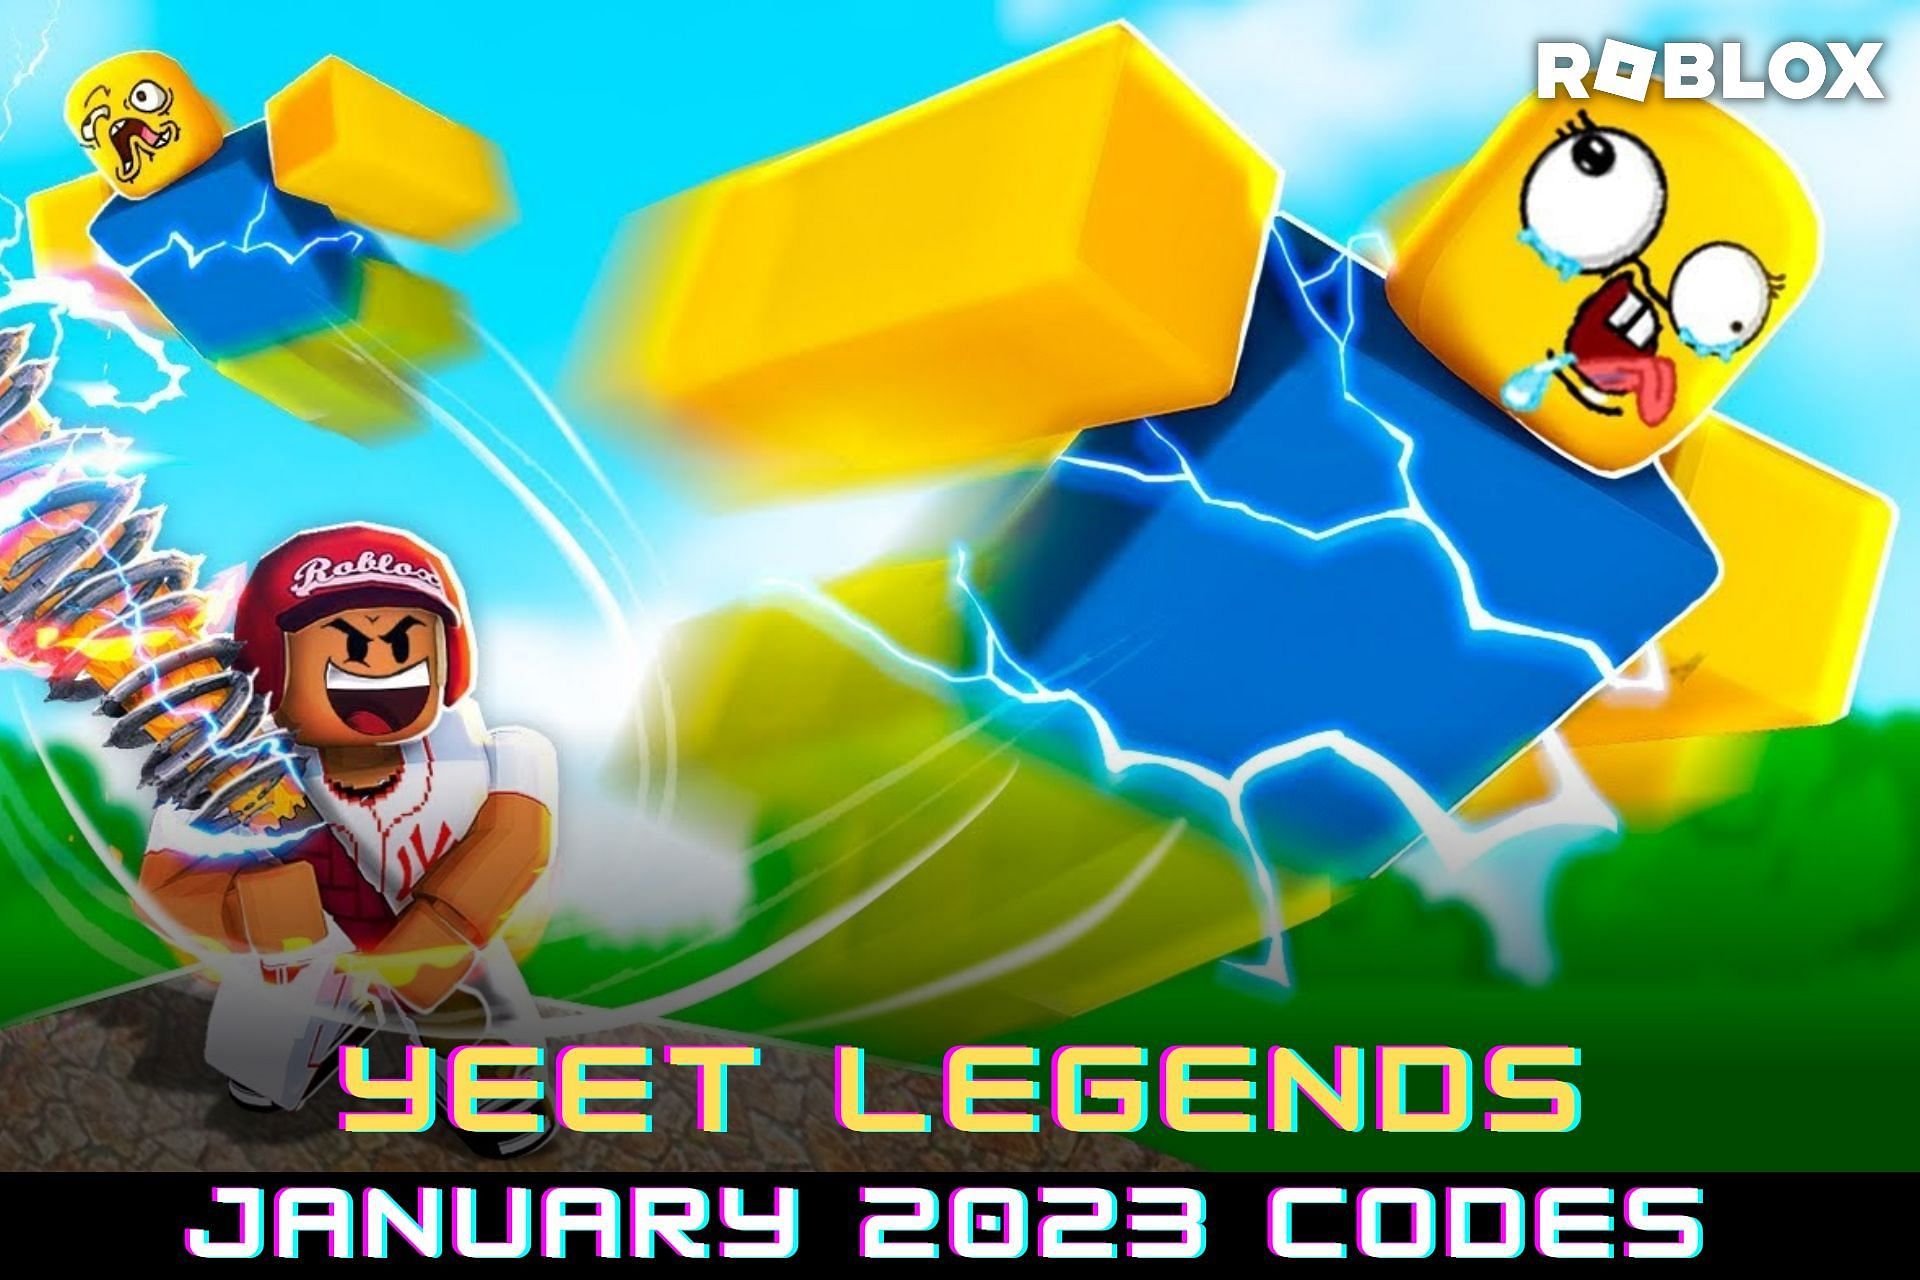 Roblox Yeet Legends Codes for January 2023: Free gems and boost